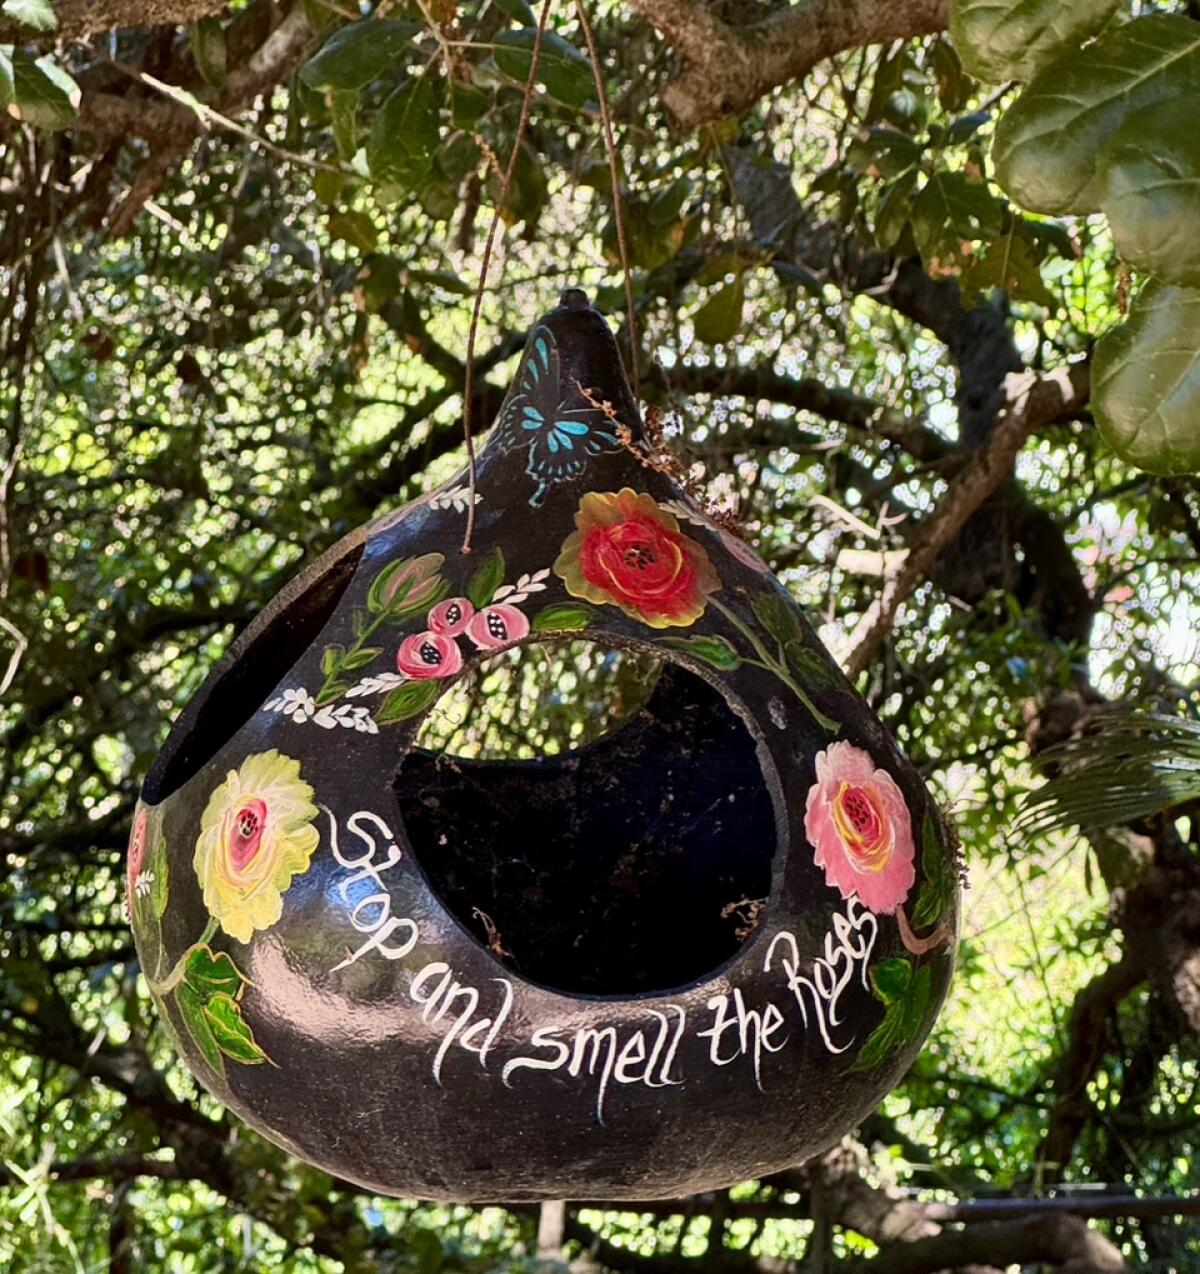 A hanging decorative gourd is painted with flowers and the words "Stop and smell the roses."